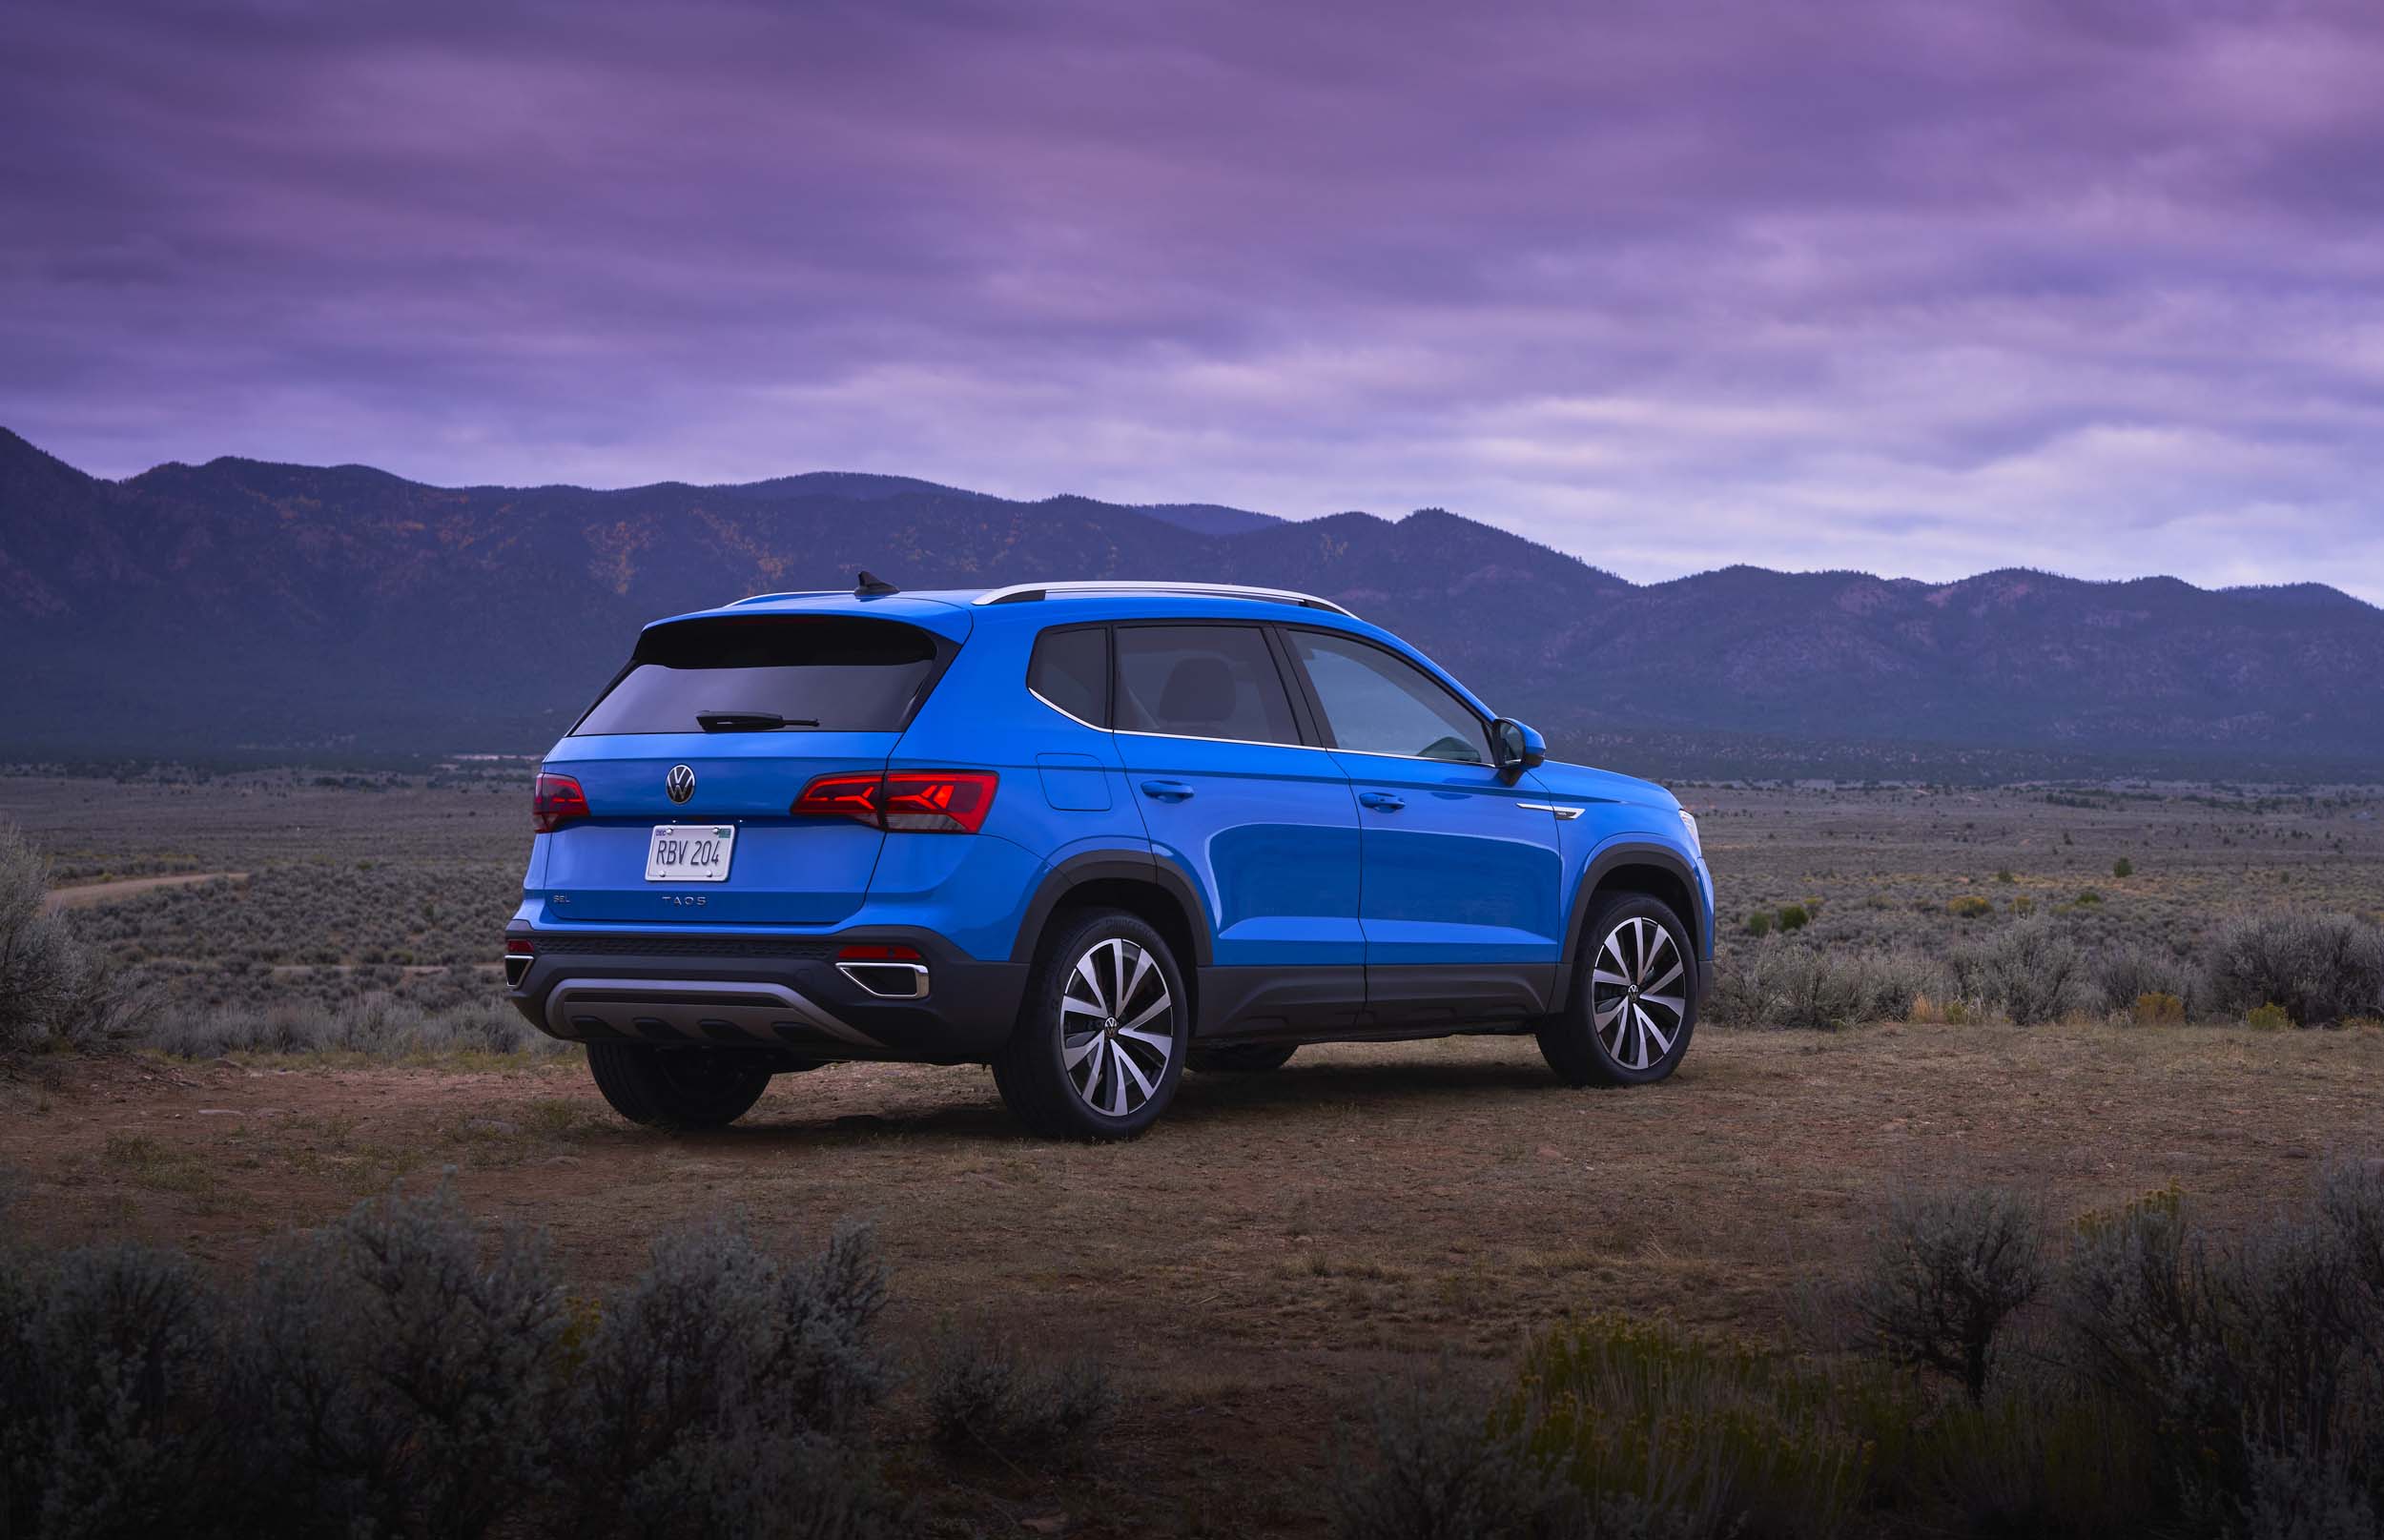 5 things to know about the new 2022 Volkswagen Taos